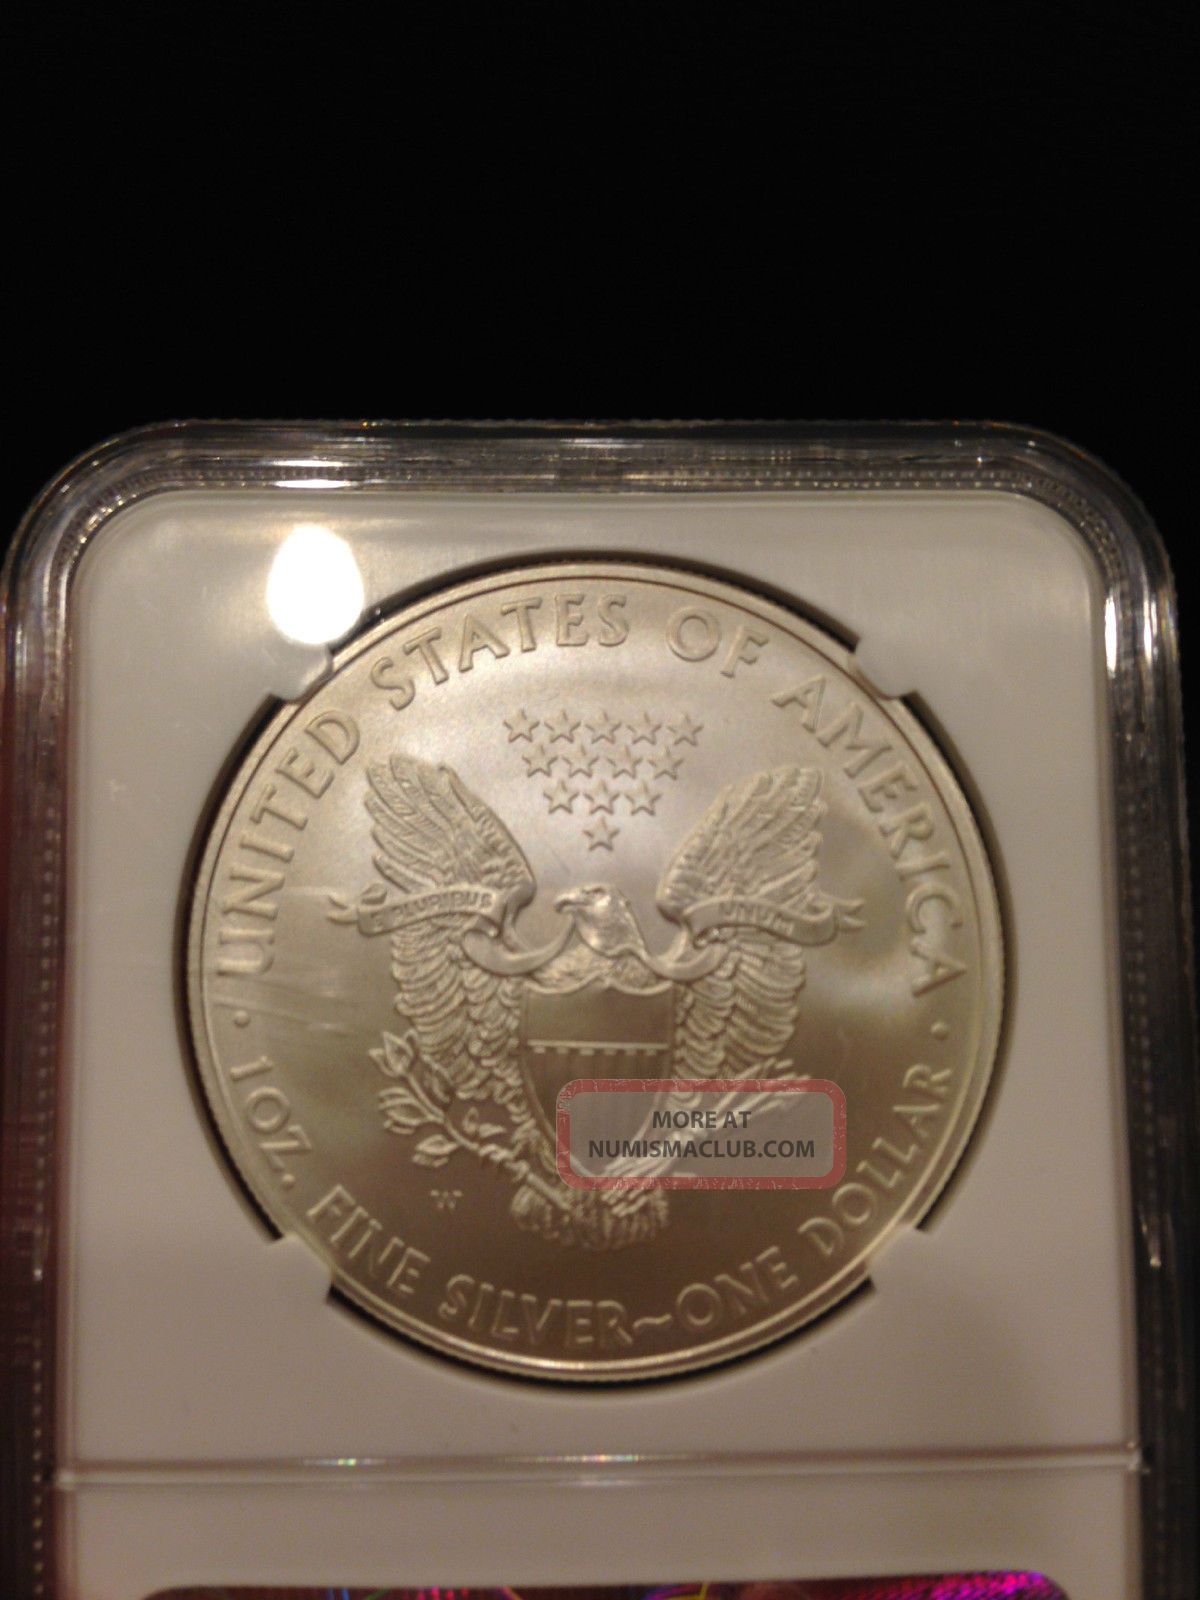 2008 W (burnished) Silver American Eagle Ngc Ms - 69